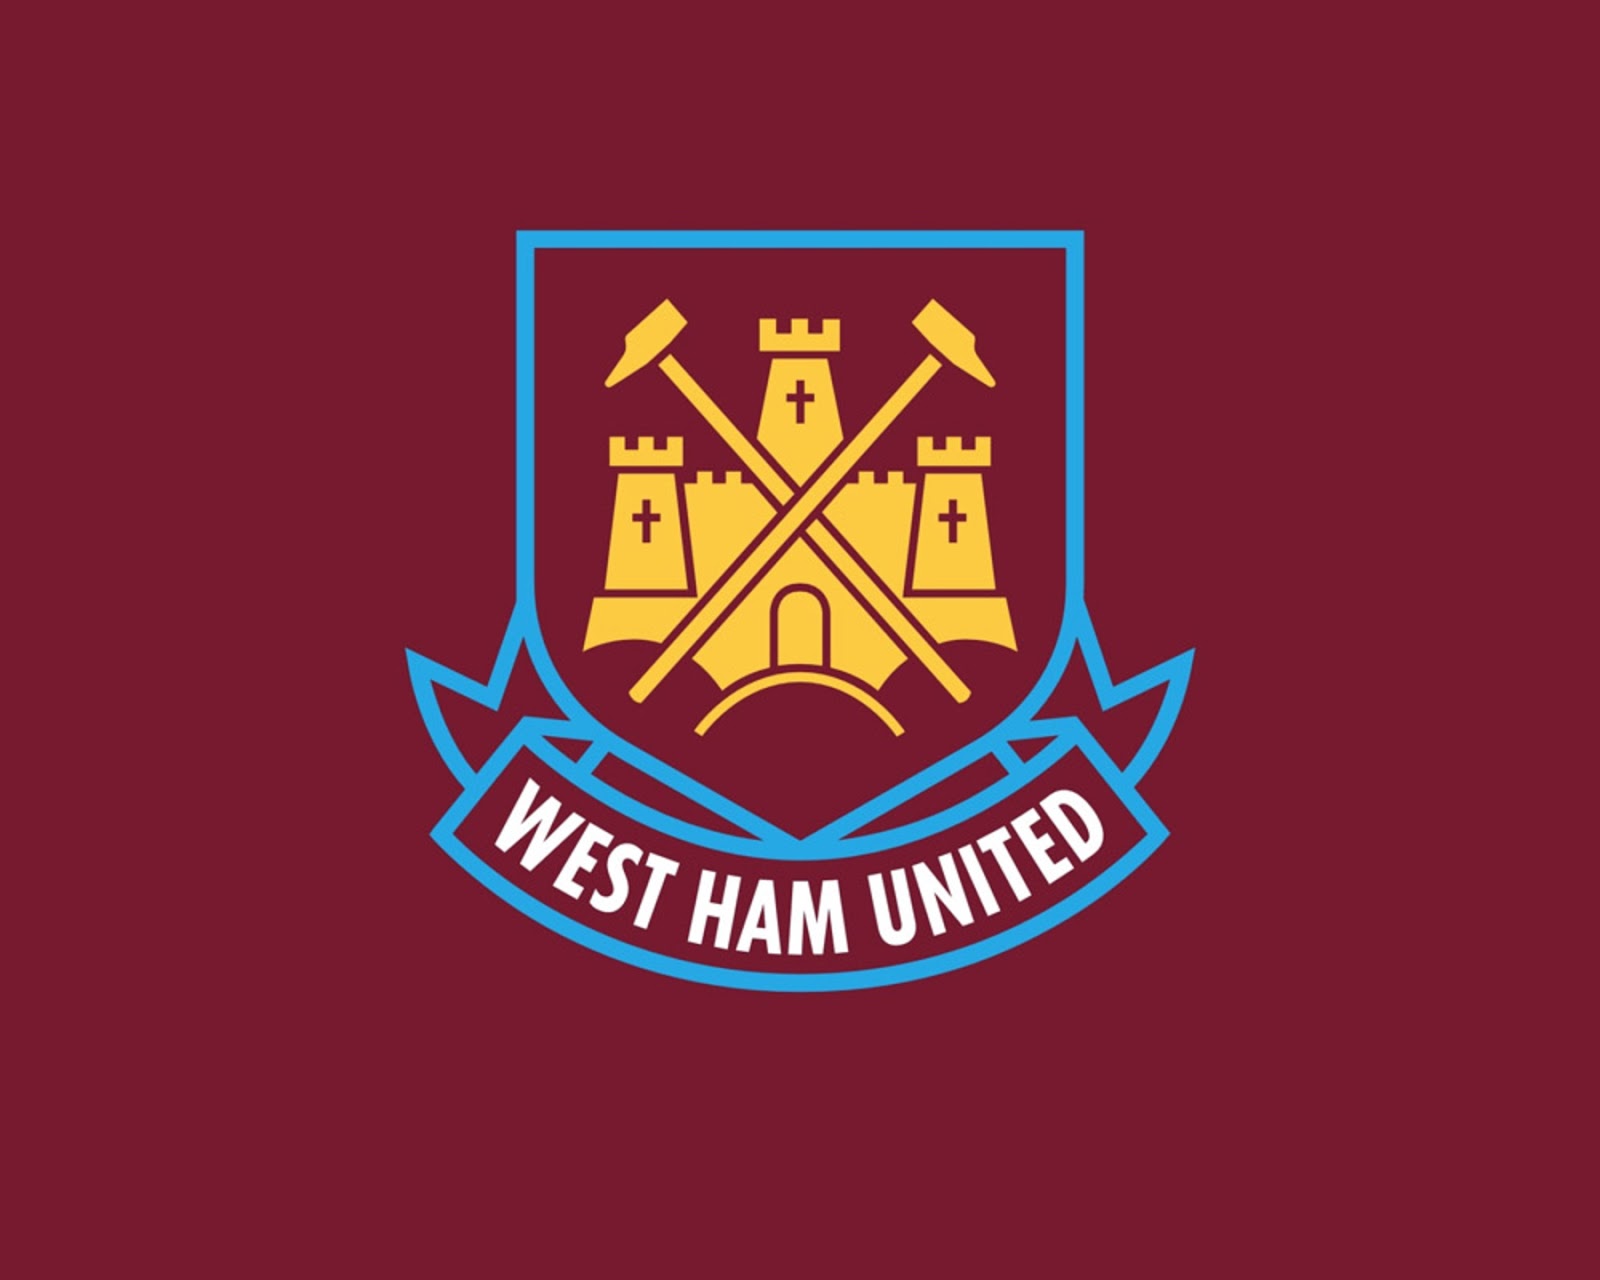 World Cup: West Ham United Logo Wallpapers - Jan